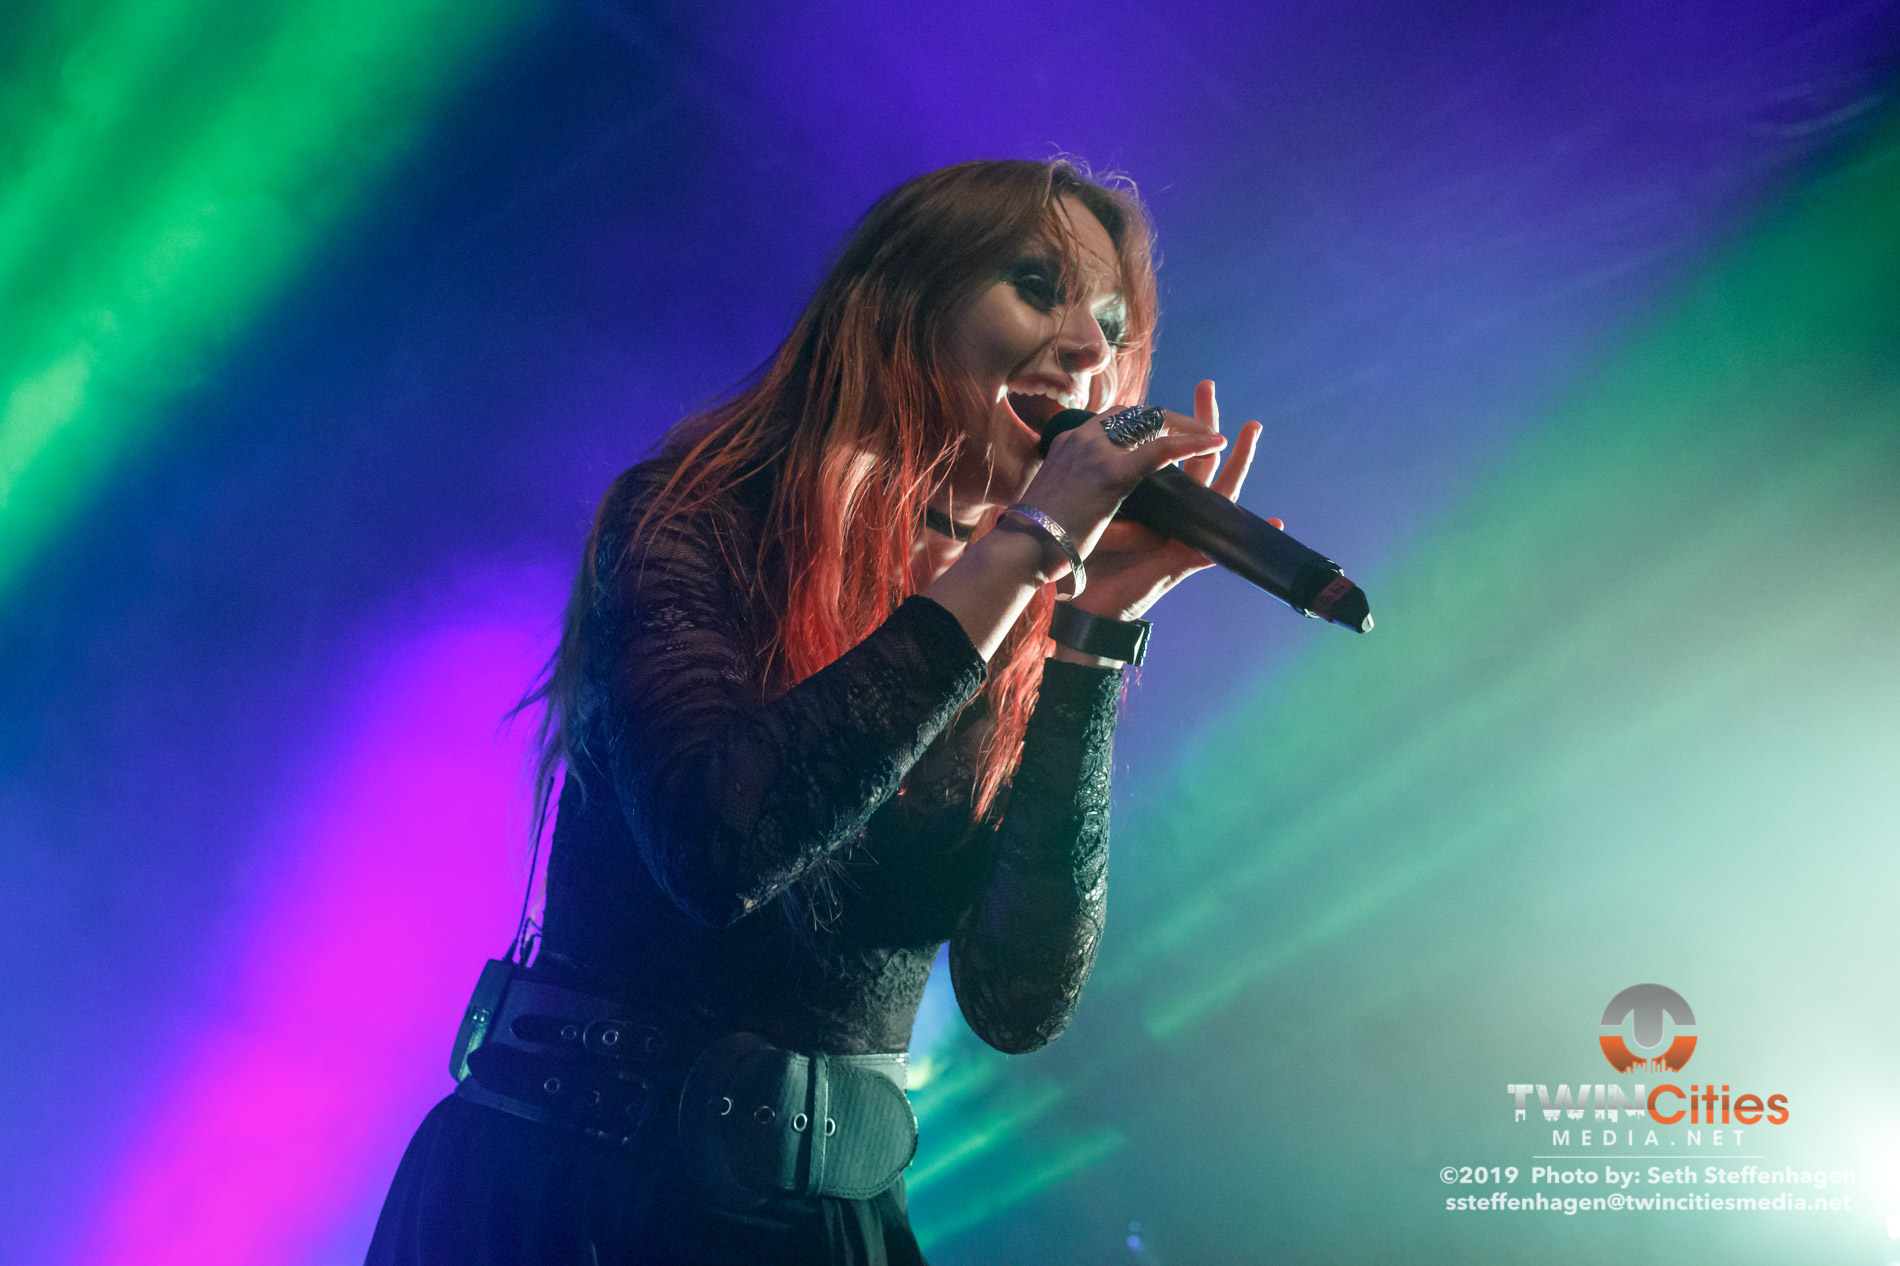 October 5, 2019 - Minneapolis, Minnesota, United States -  Eluveitie live in concert at The Cabooze co-headlining with Korpiklaani and with Gone In April as the openers.(Photo by Seth Steffenhagen/Steffenhagen Photography)